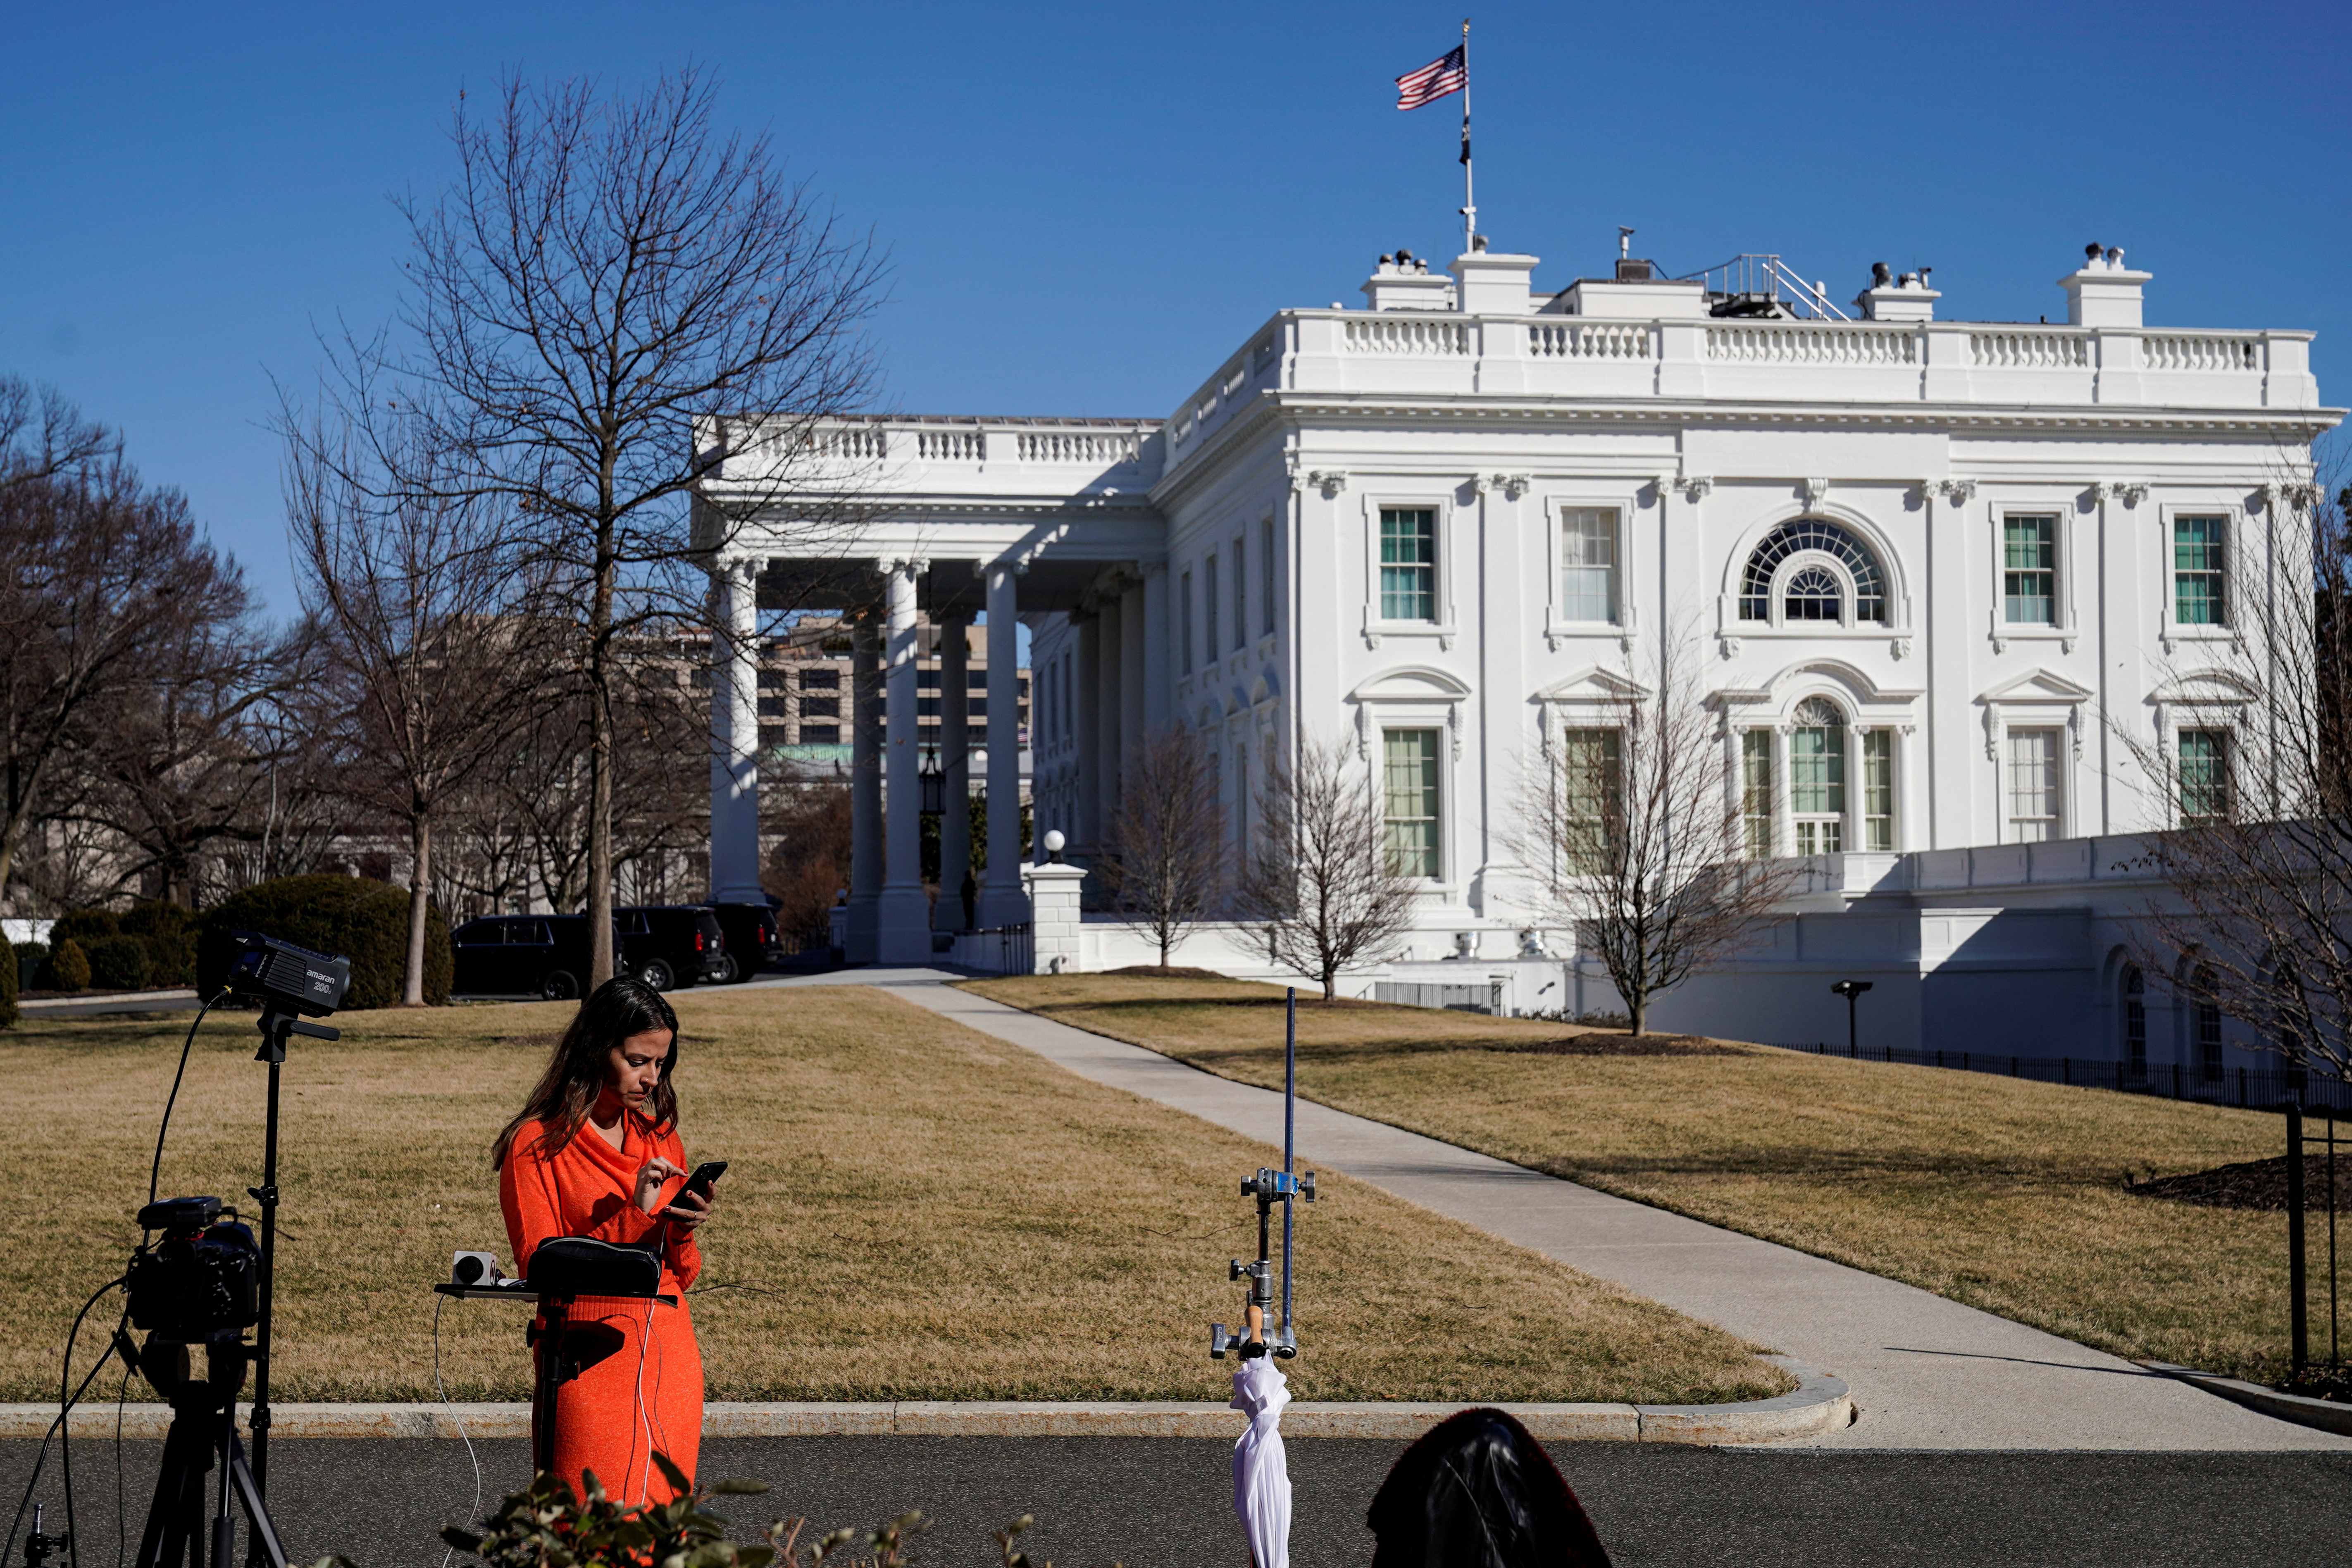 Journalists report on the ongoing situation in Ukraine at the White House in Washington